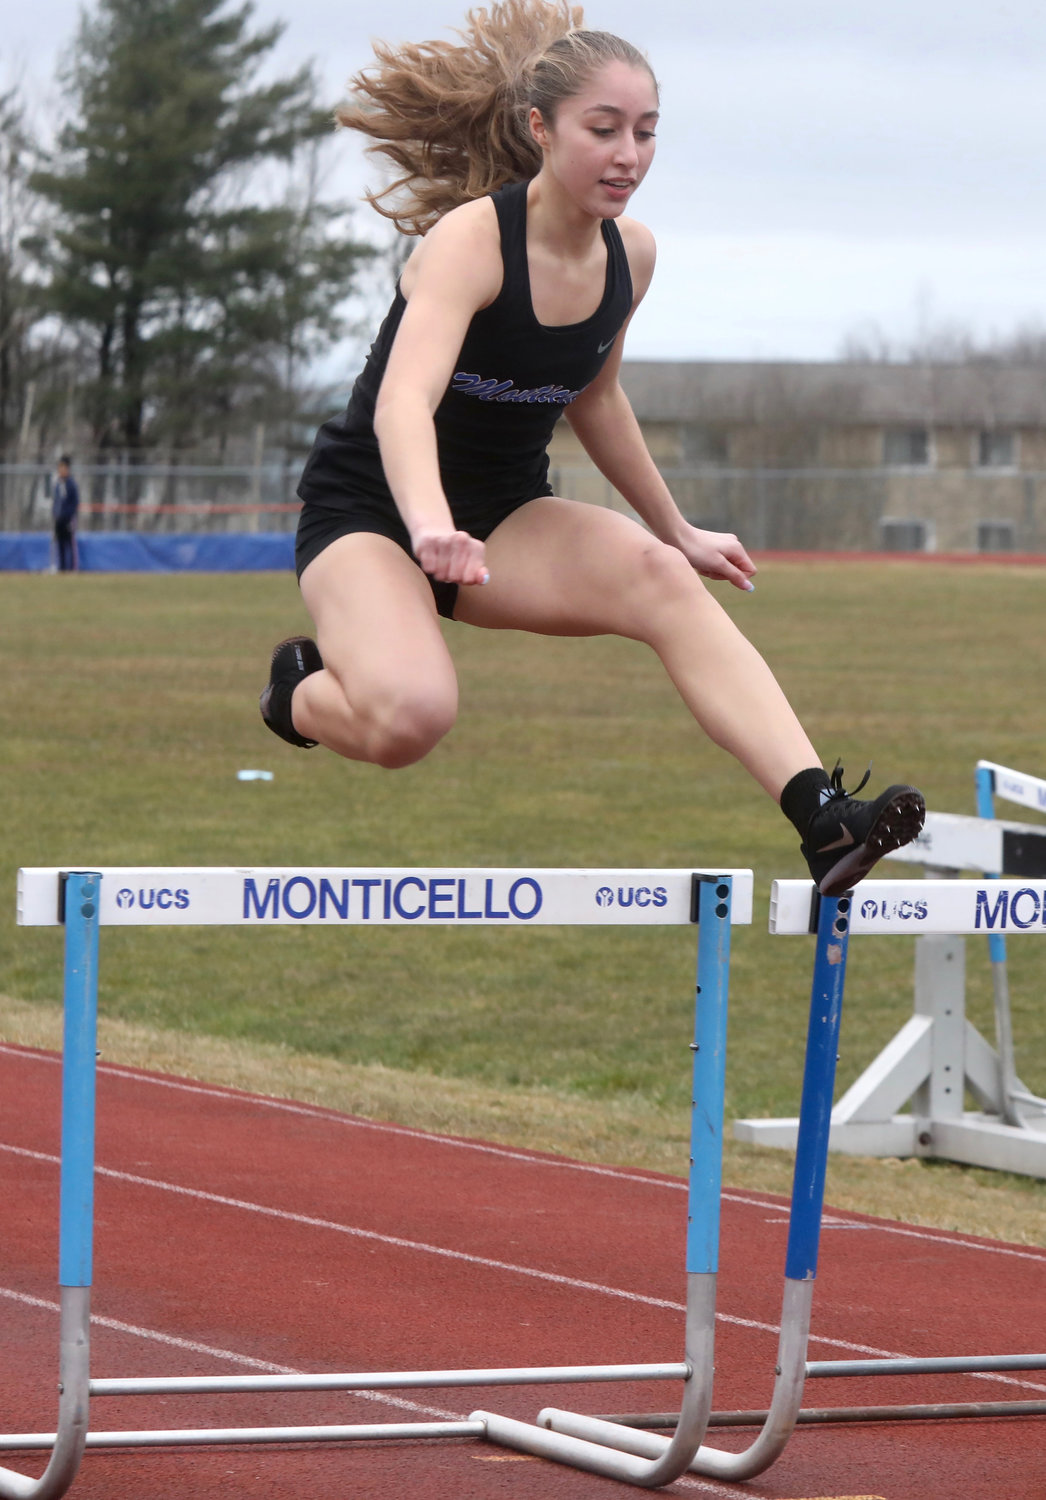 Monticello’s Taina DeJesus is working towards her return to supremacy in the 100 hurdles. She captured first place, won the 400 and ran a leg in the winning 4x100 relay. Later in the season she will work on retaking her lead in the 400 hurdles as well.